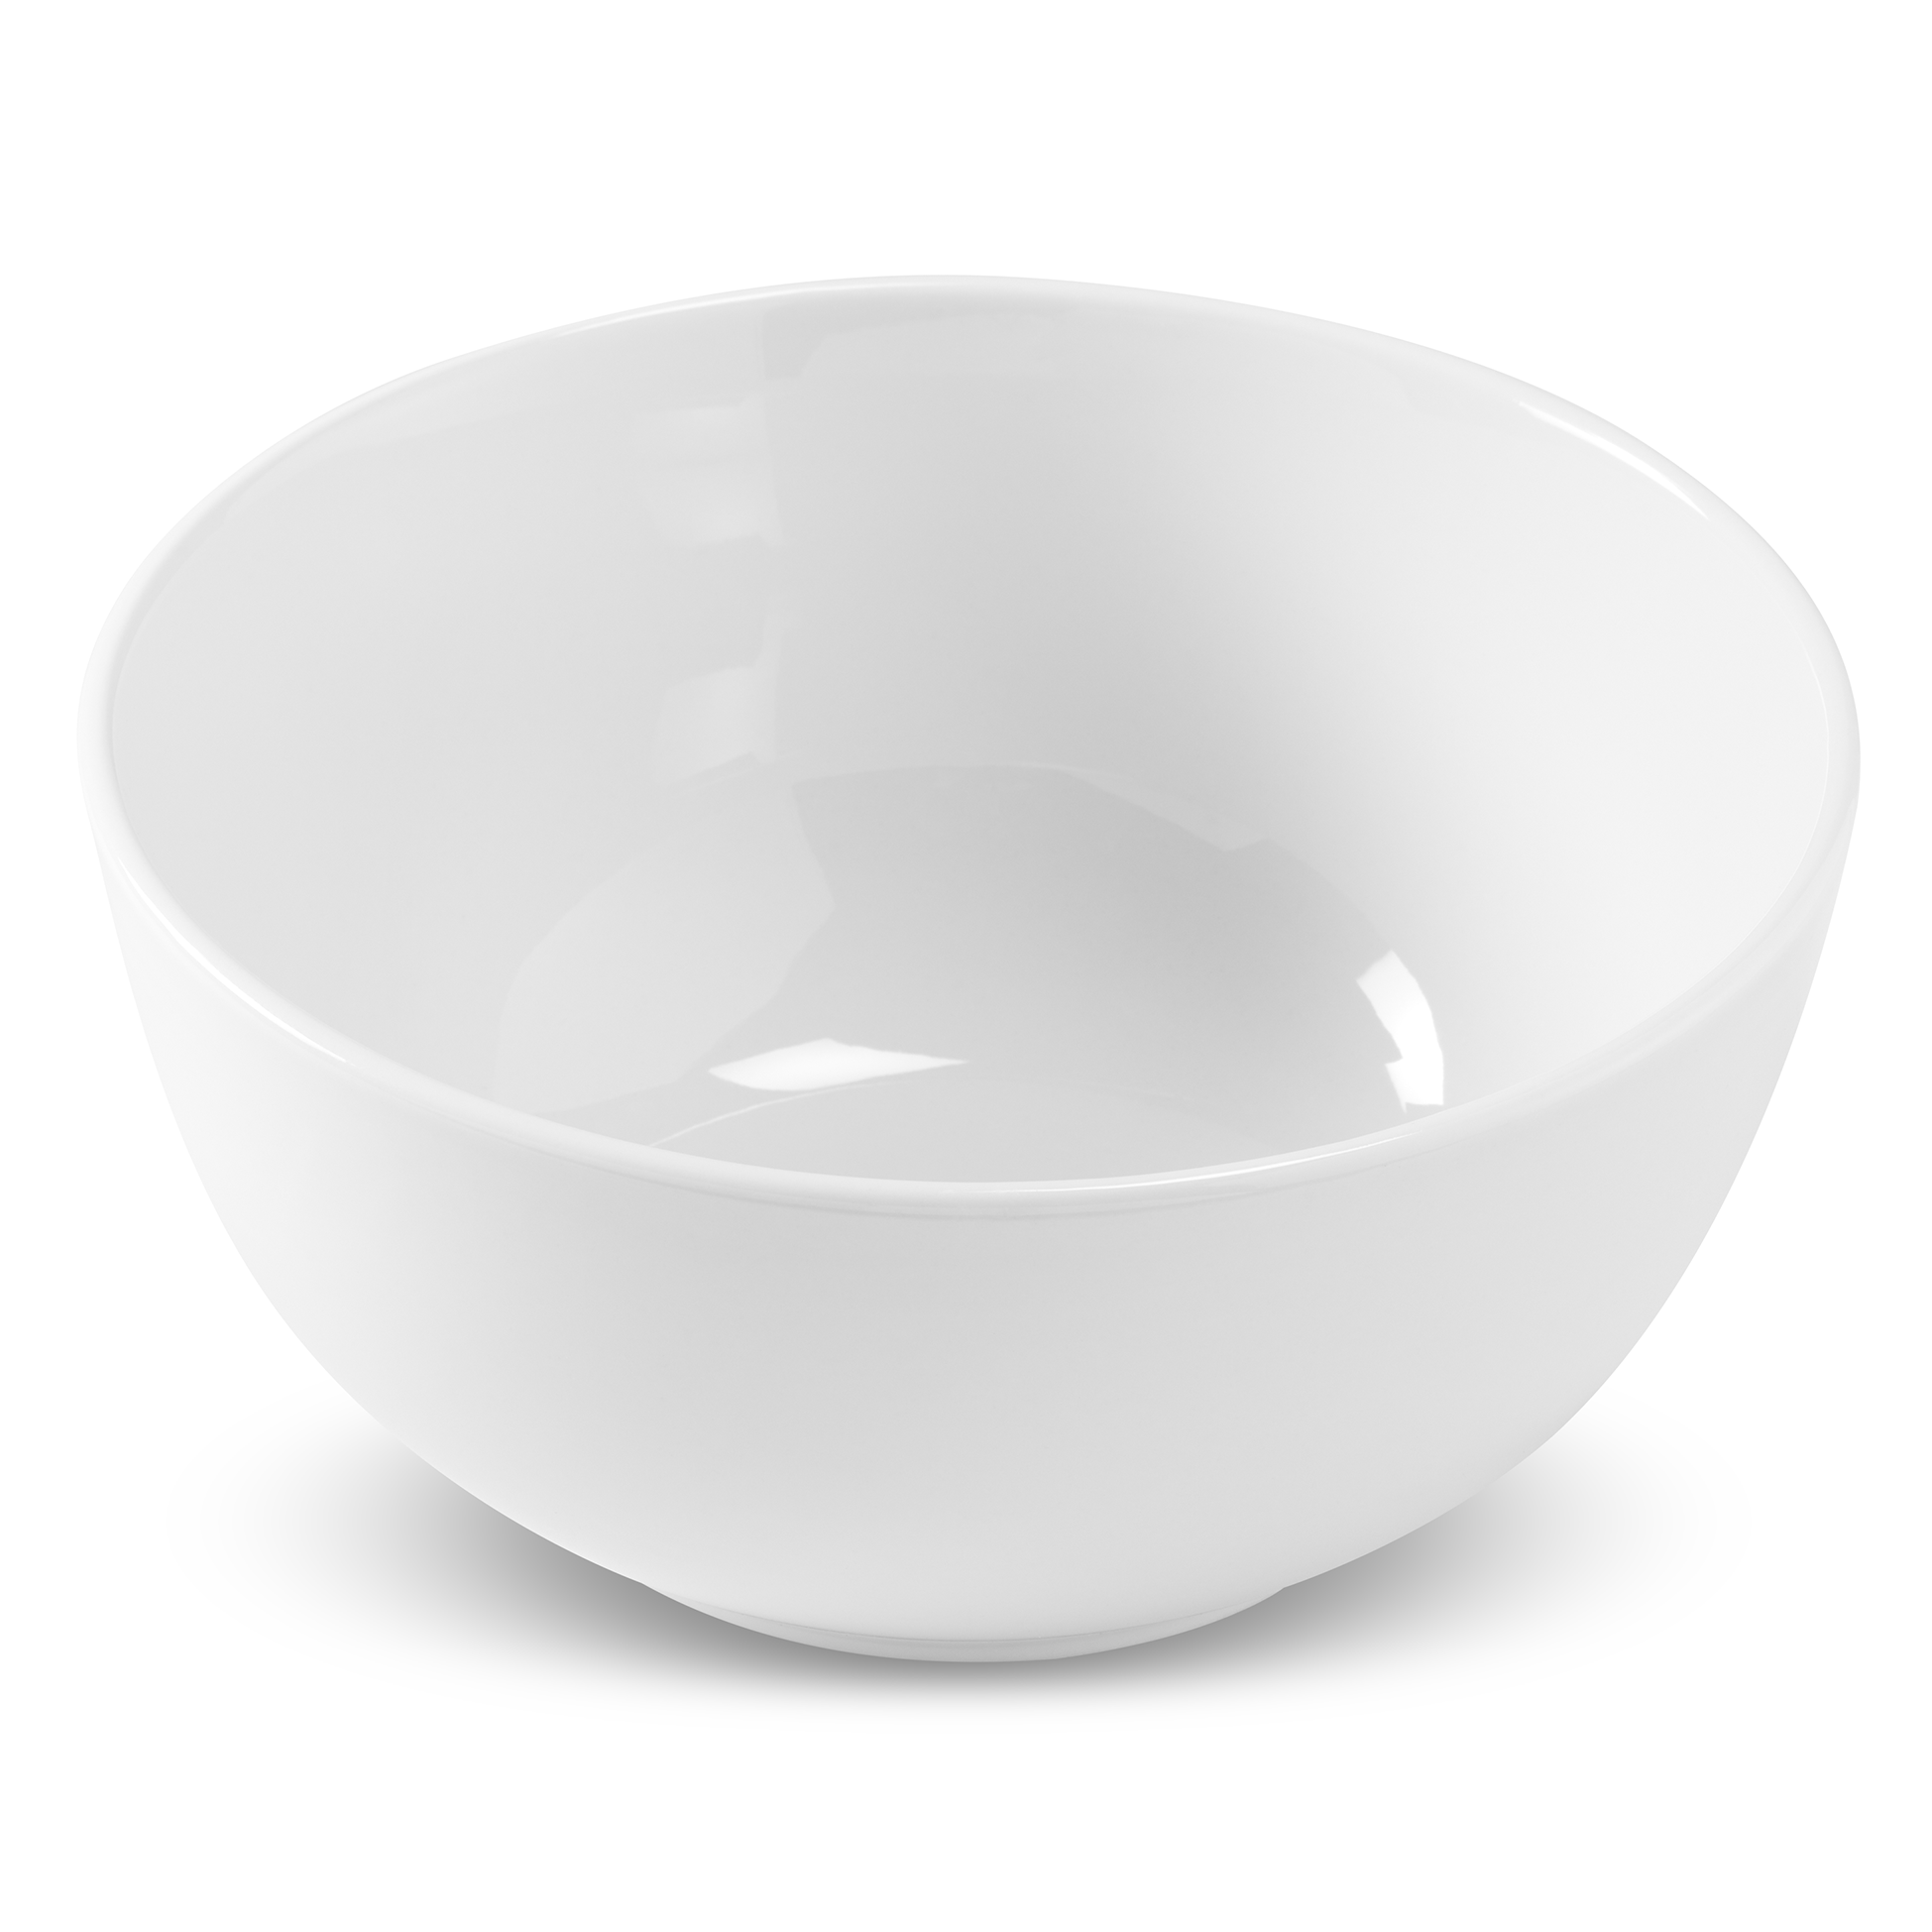 Front view, extra deep and wide ramen bowl in white porcelain